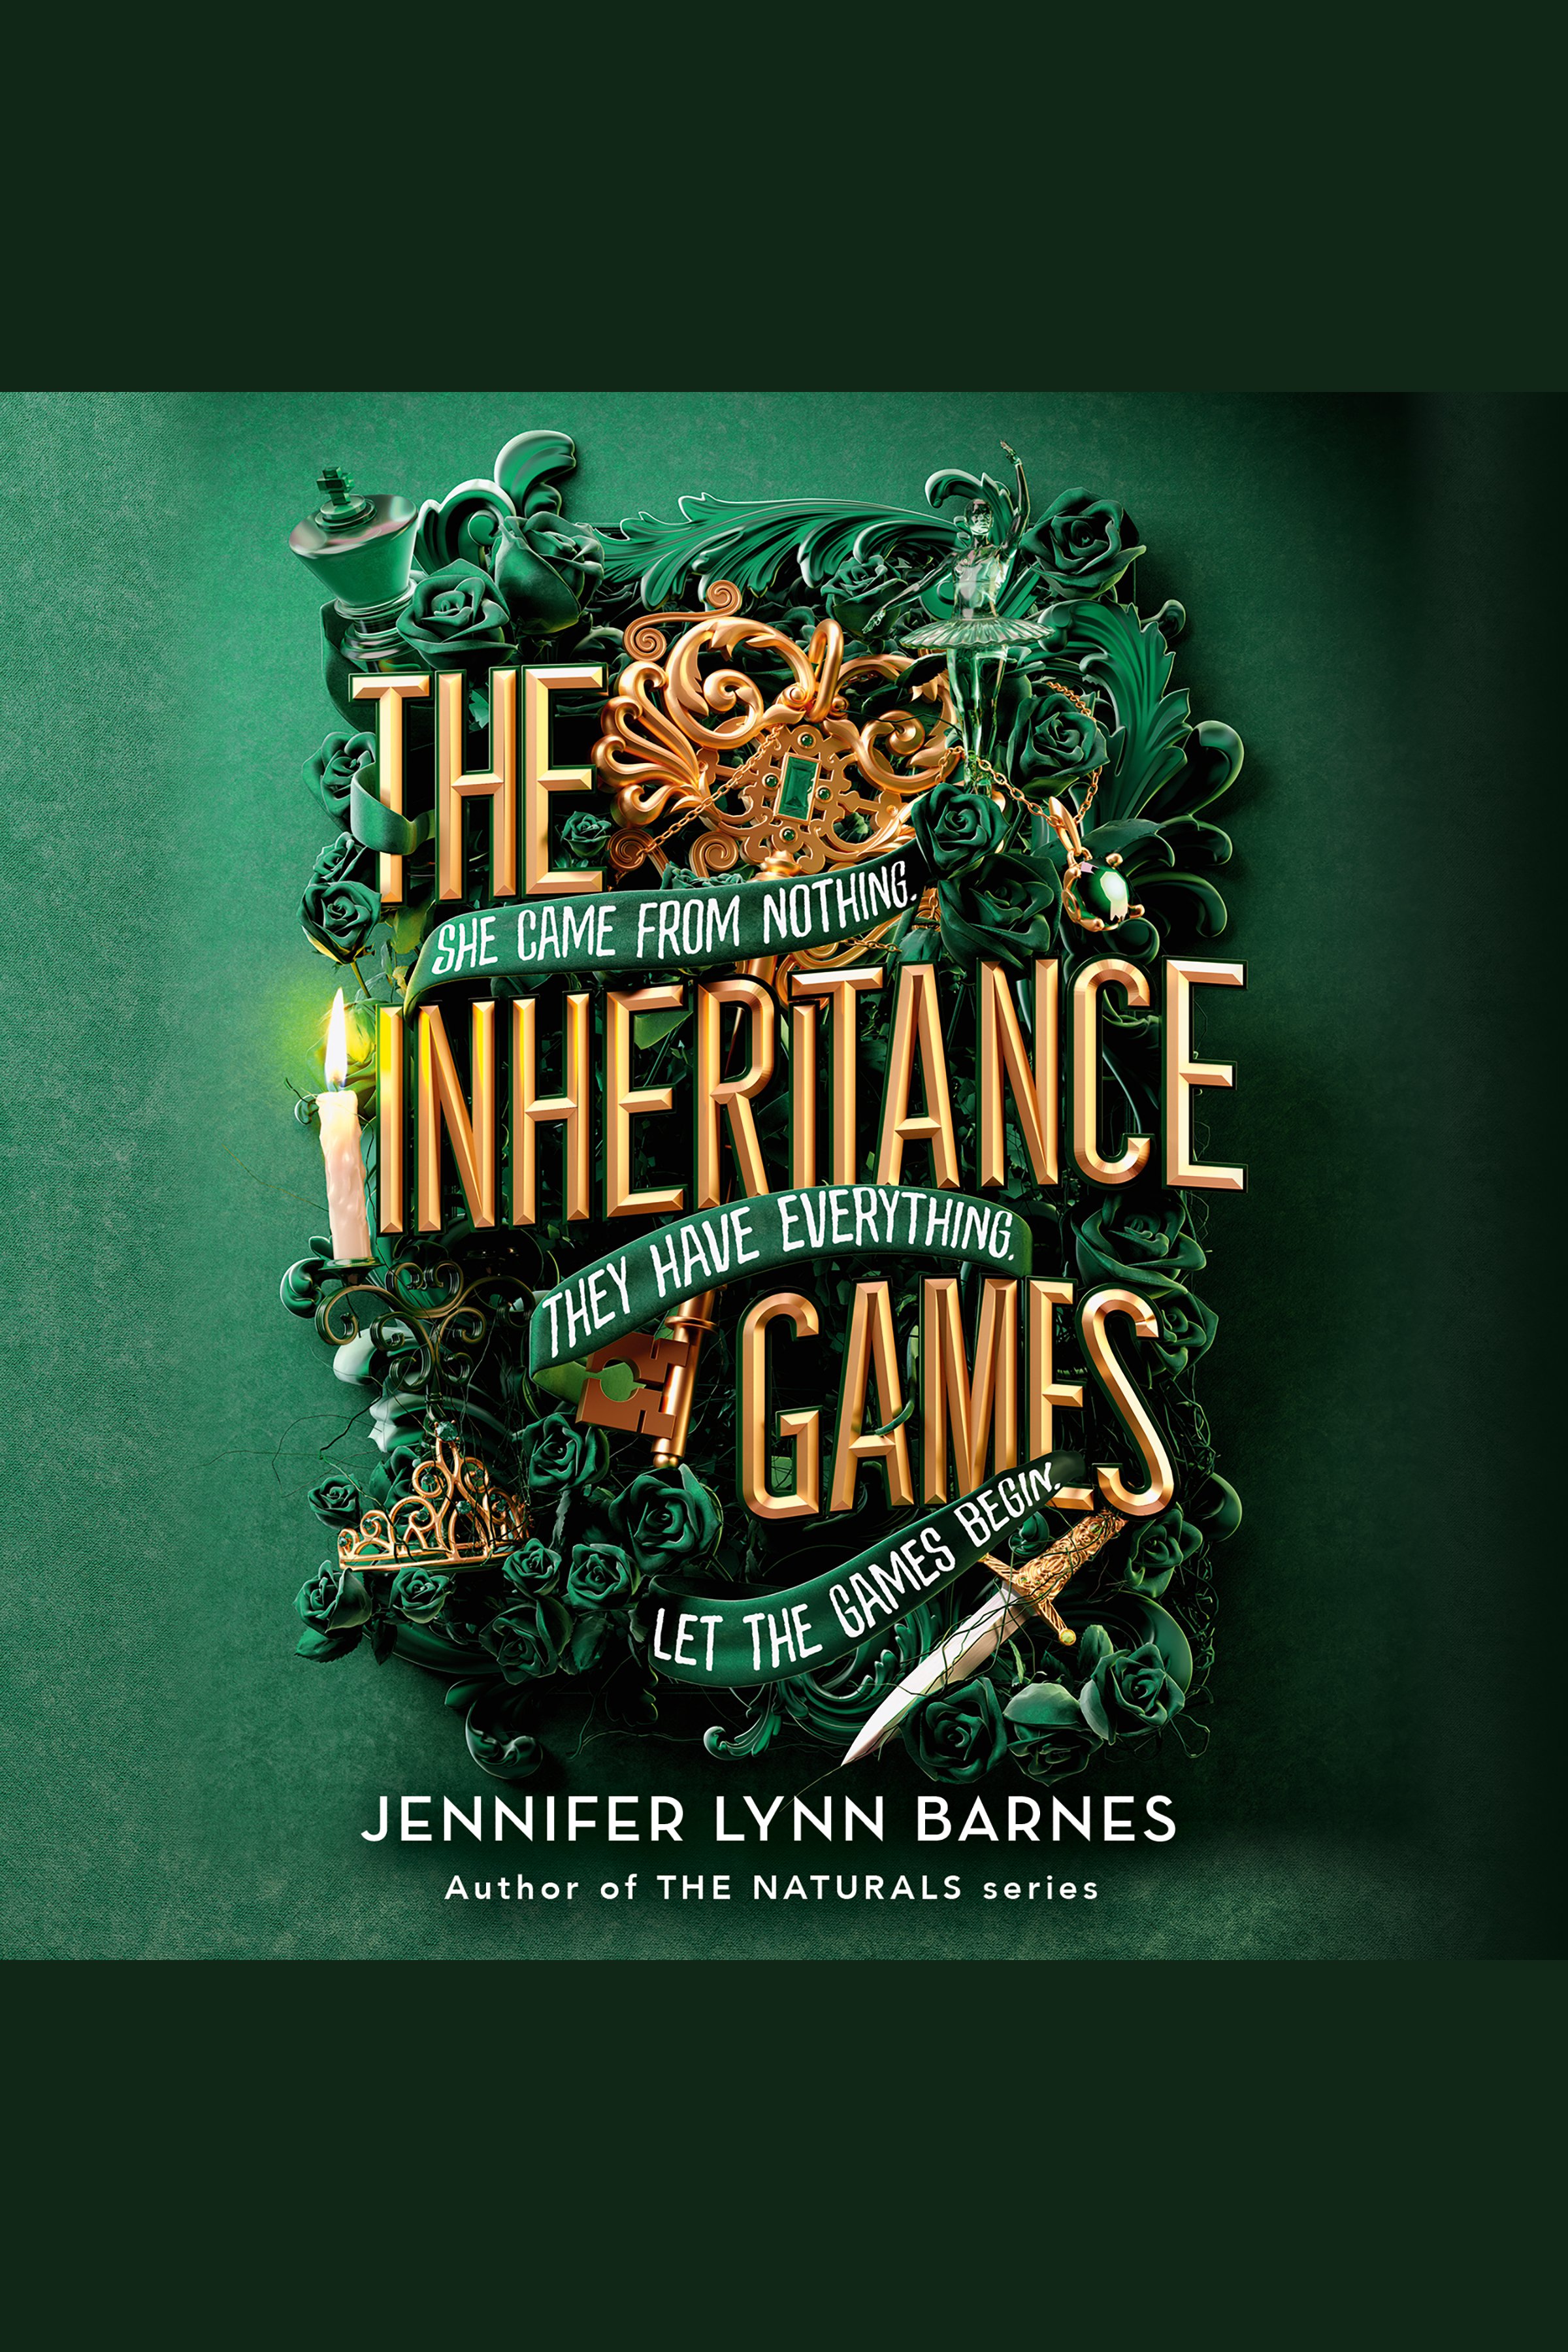 The Inheritance Games cover image